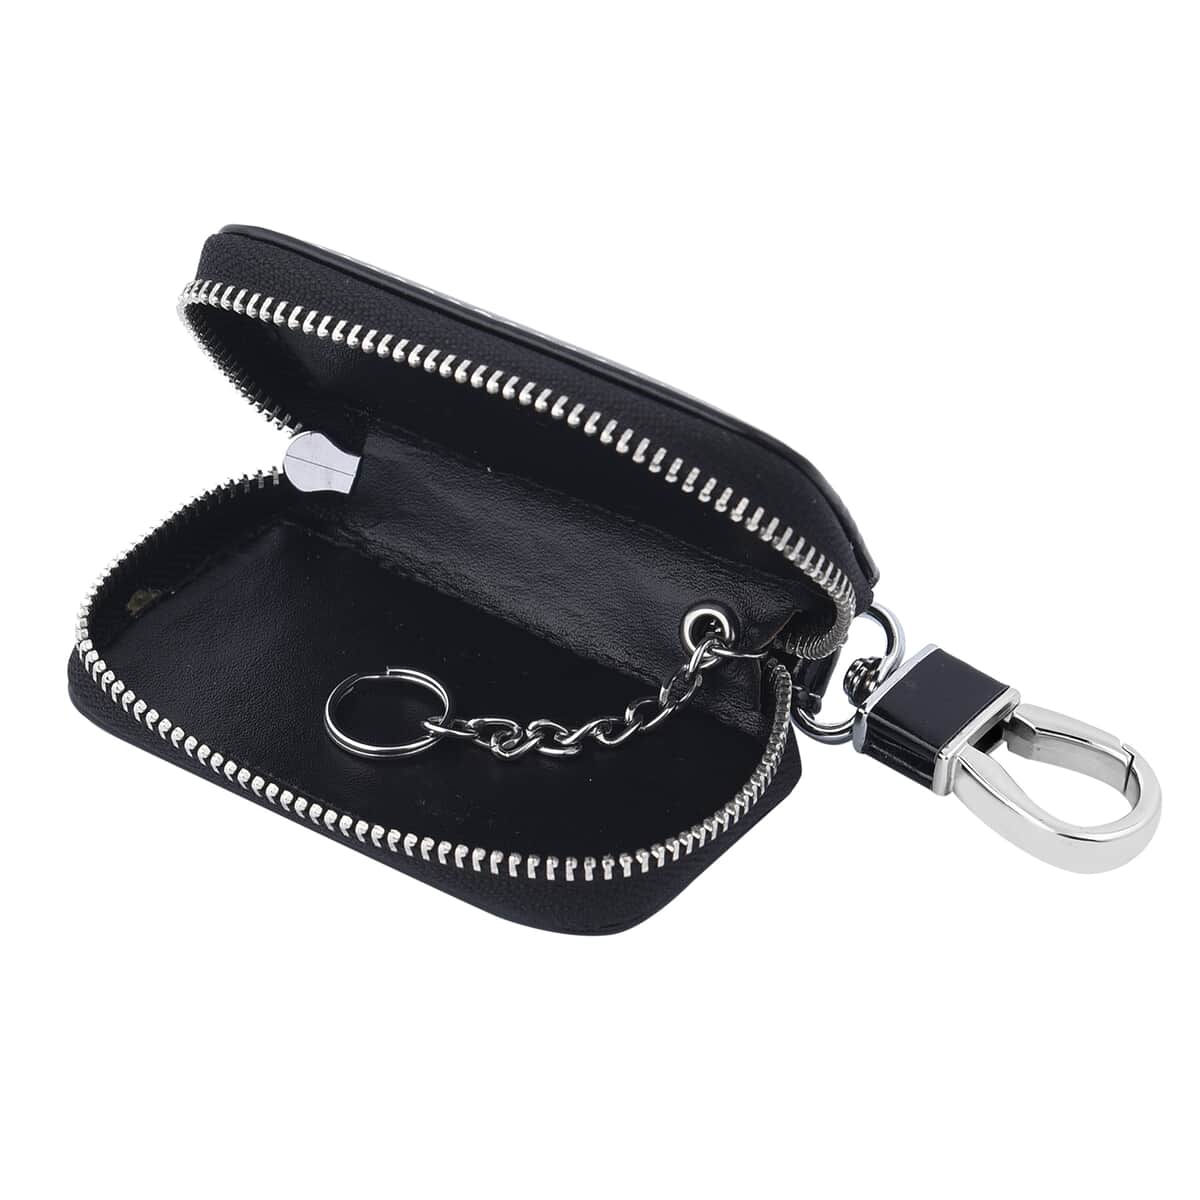 Black Square-Shaped Genuine Leather Bag With Swivel Metallic Snap Hoop, Zipper Closure, and Key-ring For Car Keys, Remote image number 3